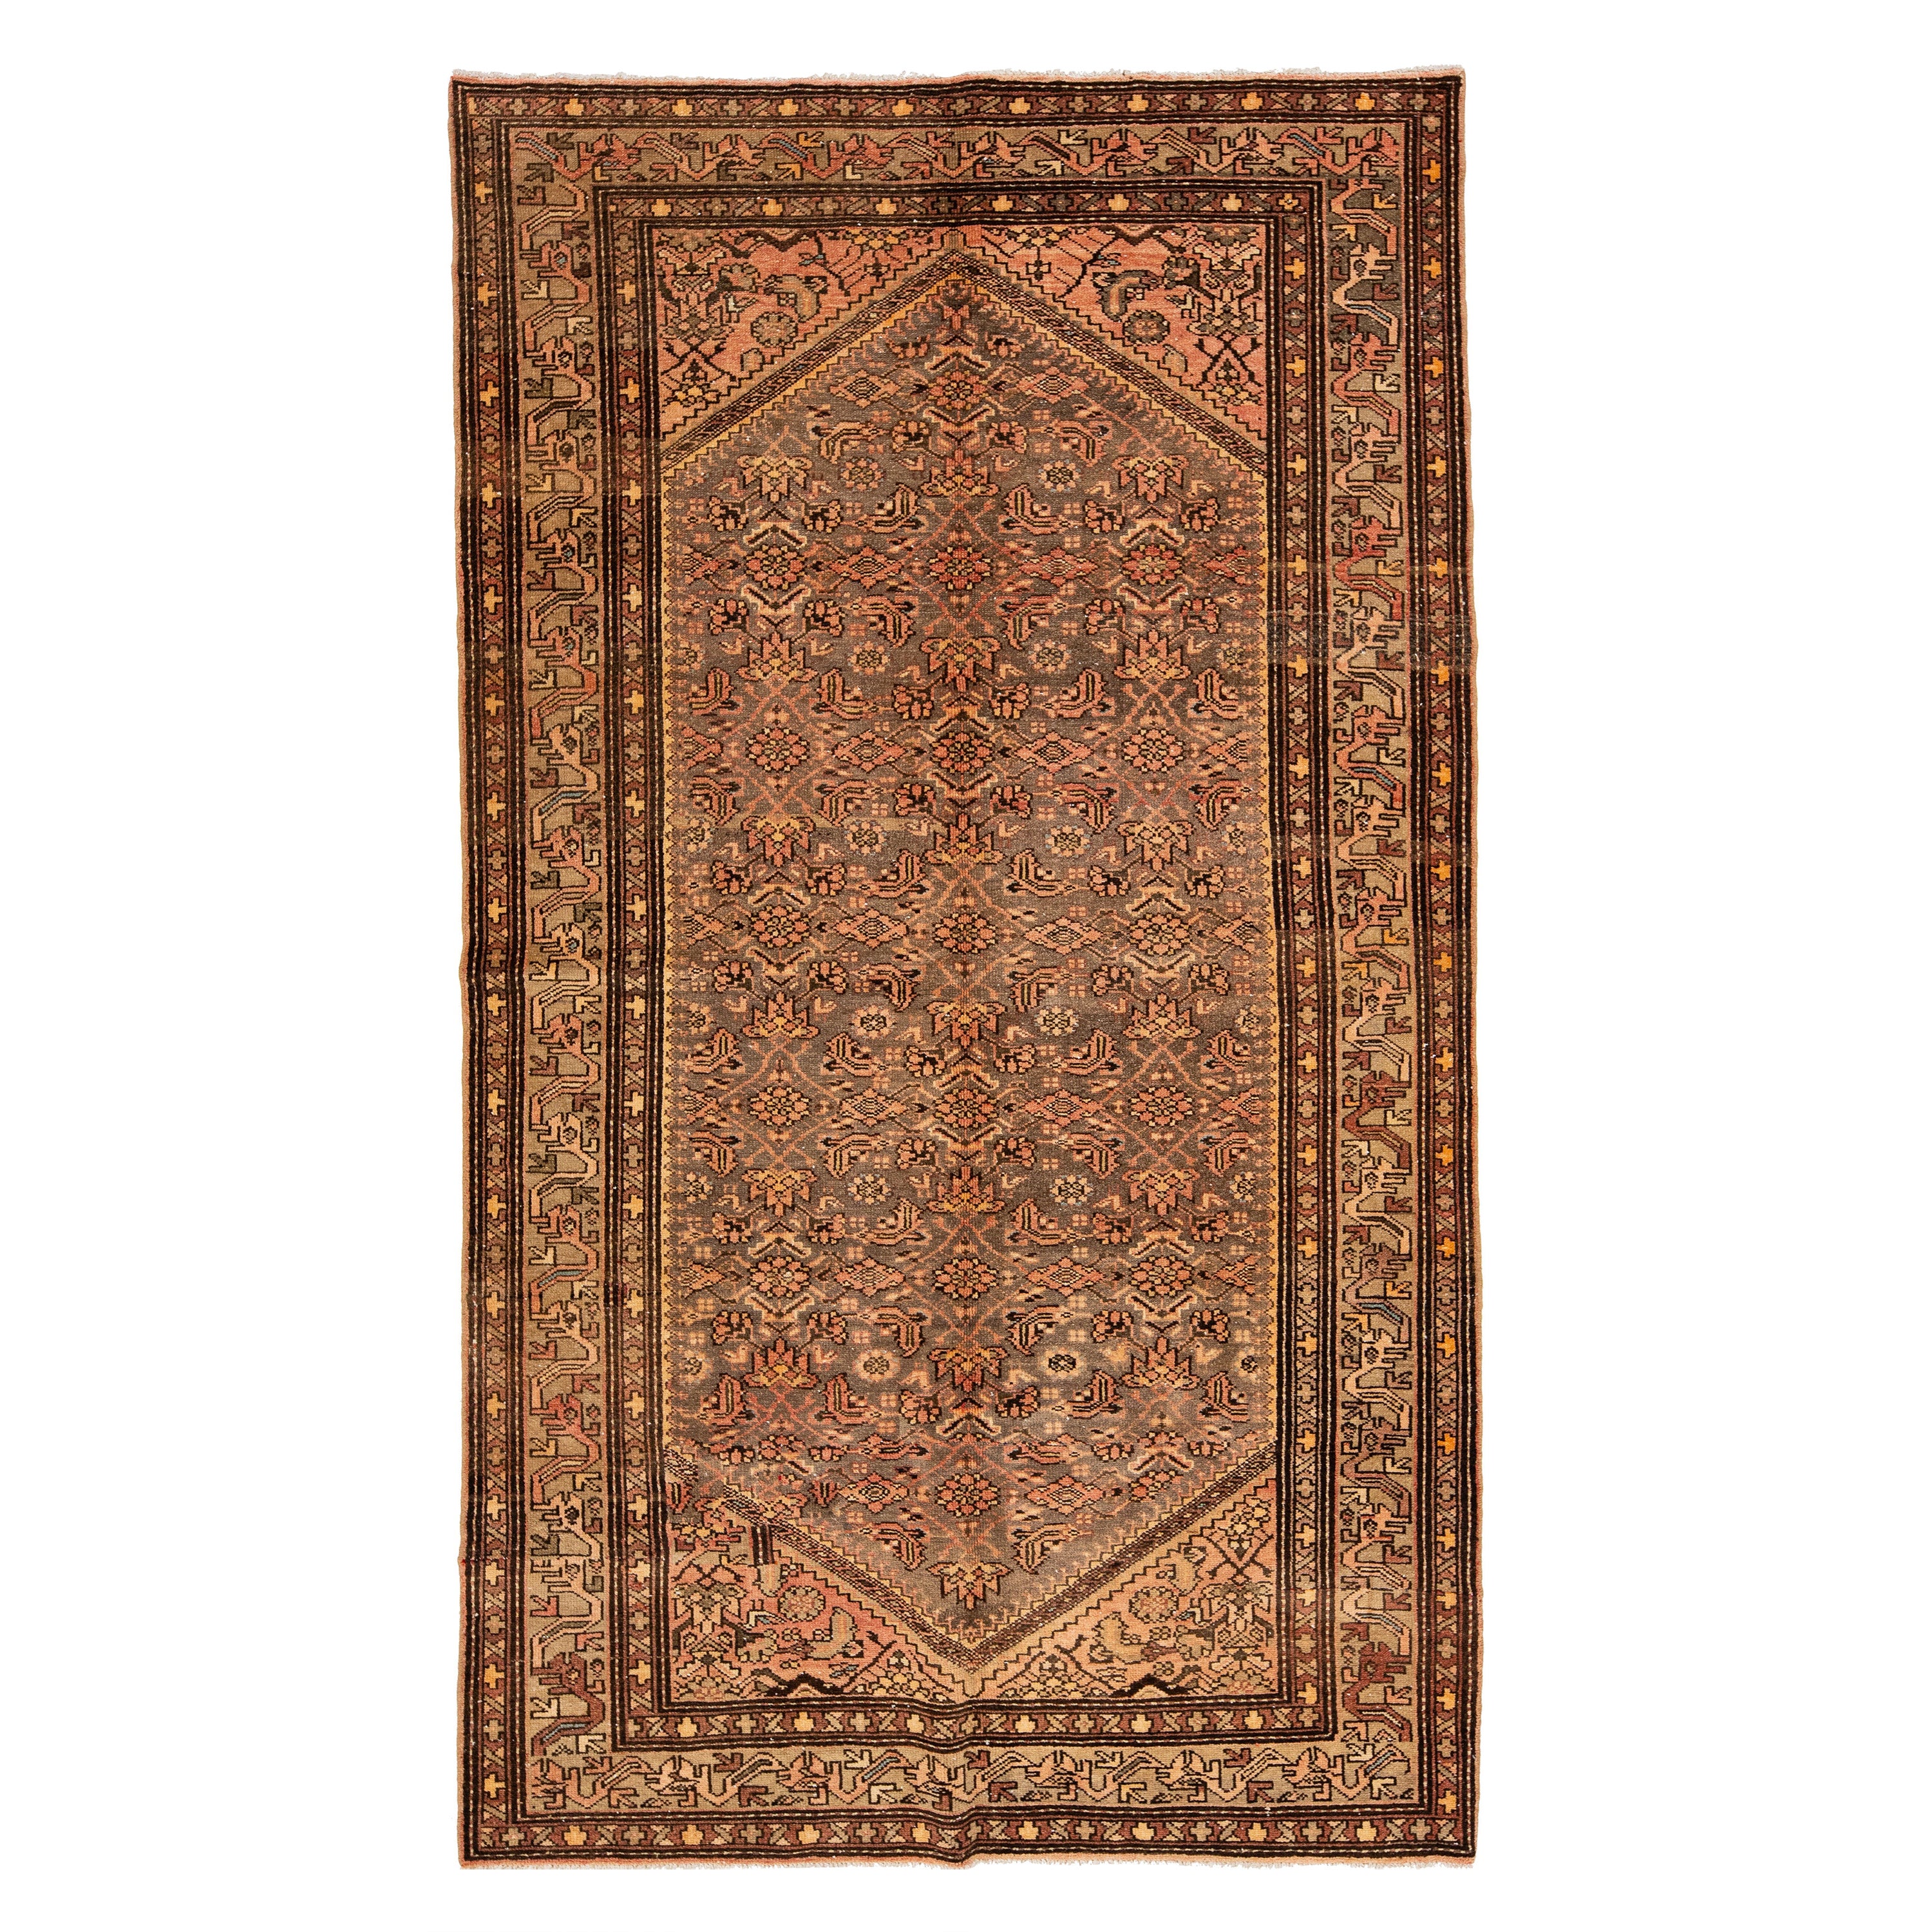 Antique Persian Malayer Gray Wool Rug From the 1920s with Floral Pattern For Sale